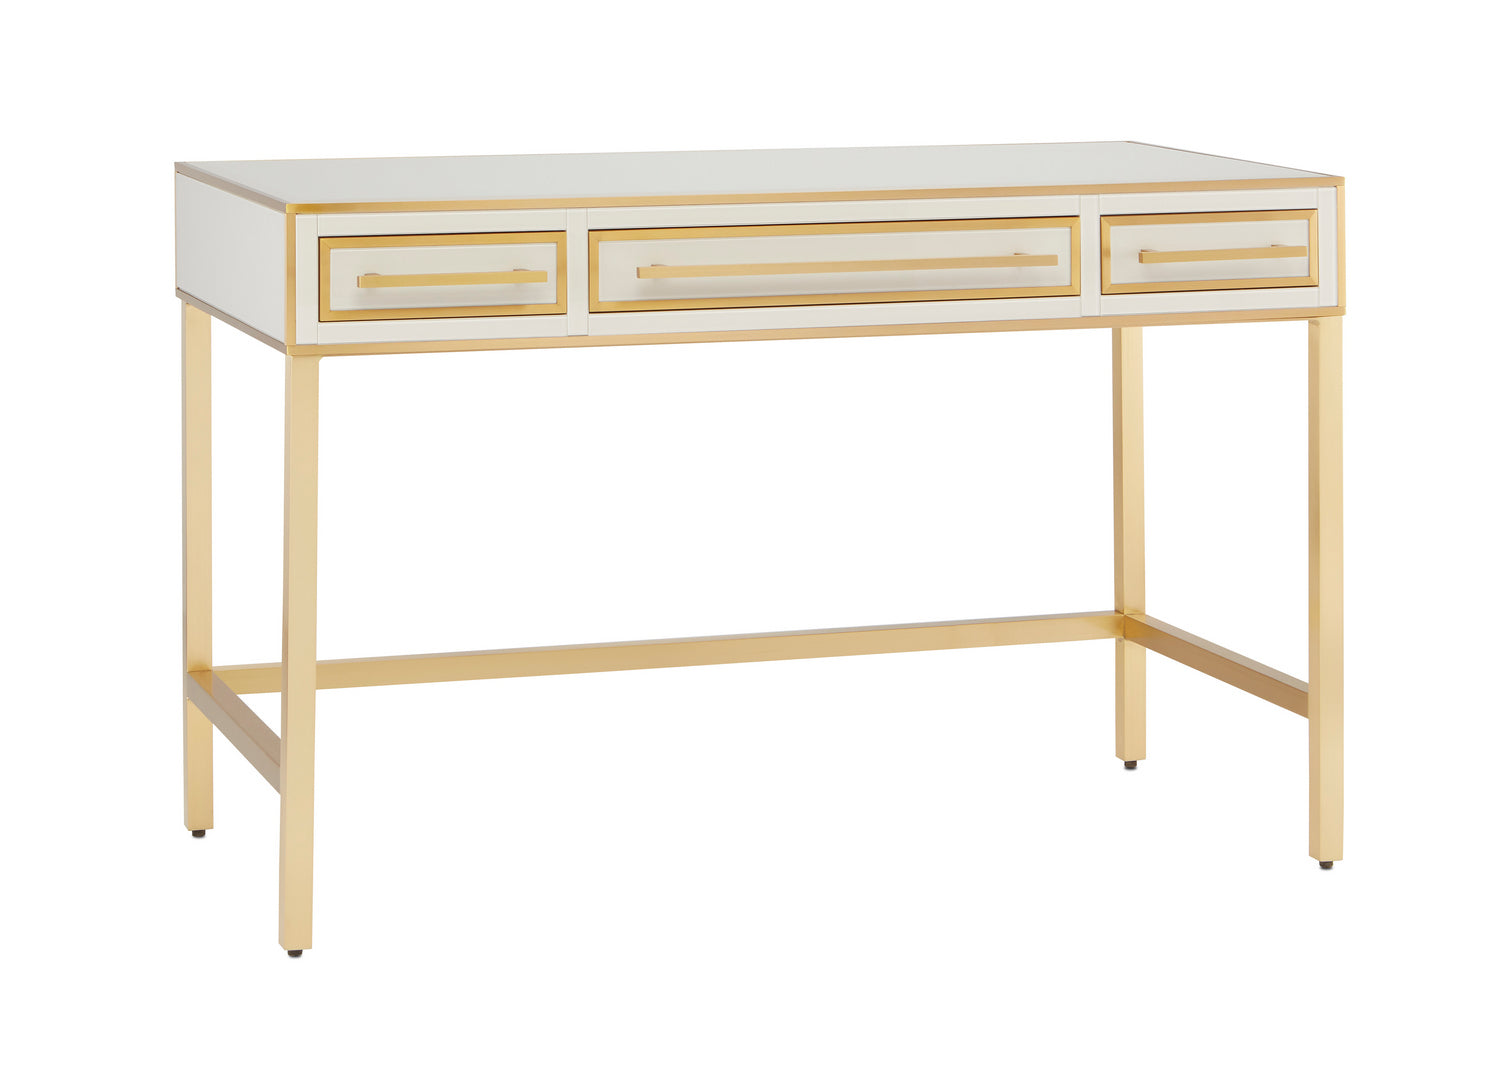 Vanity from the Arden collection in Ivory/Satin Brass/Gray finish